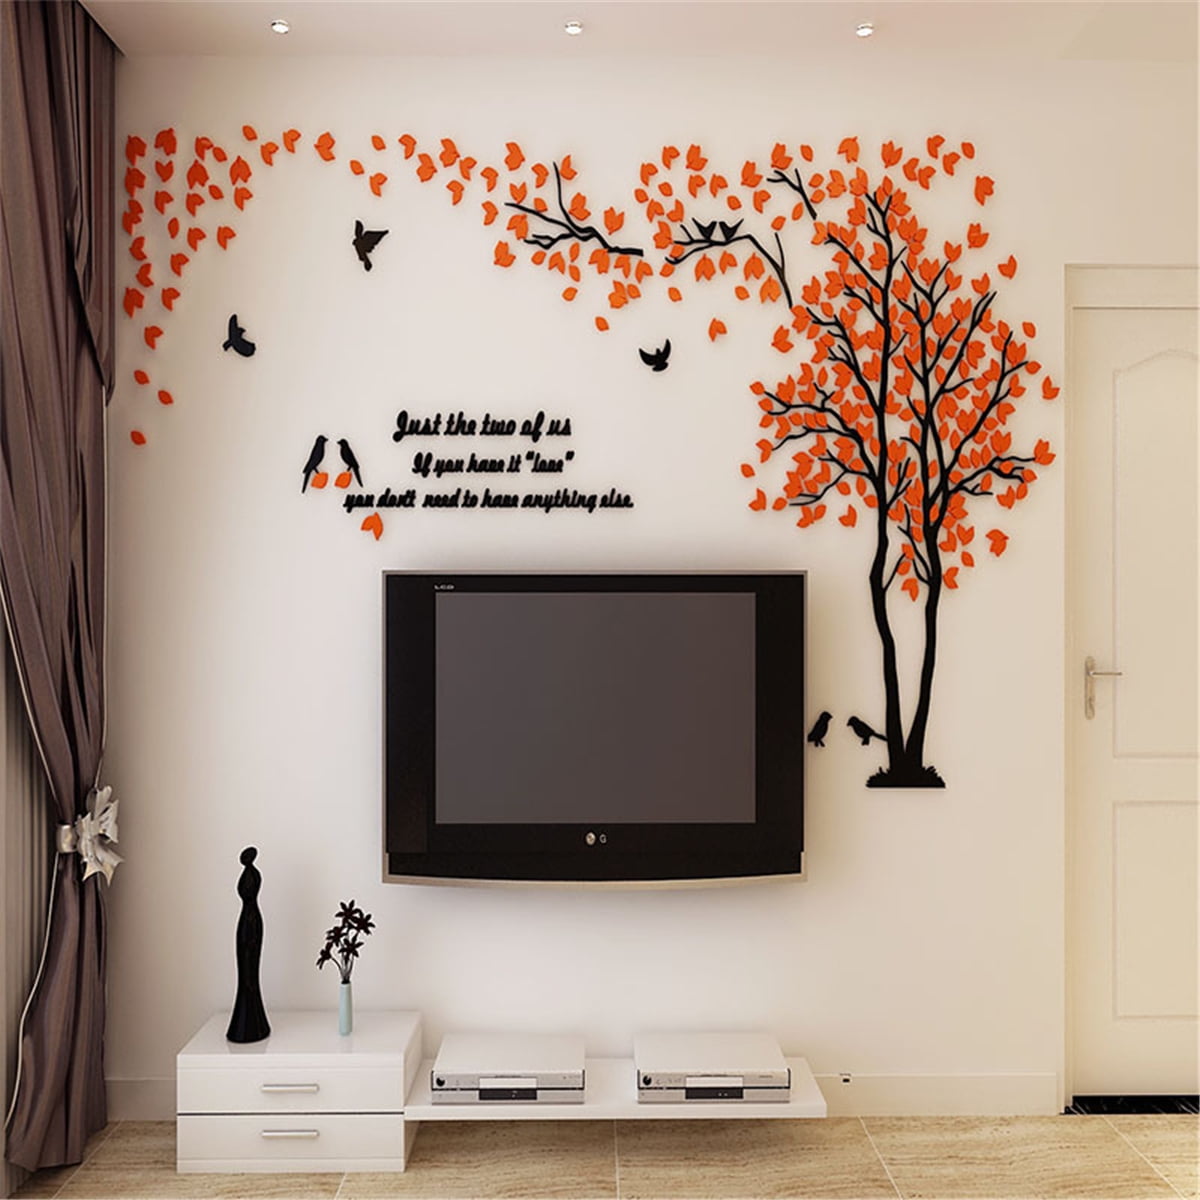 3D DIY Photo Tree PVC Wall Decals Wall Stickers Mural Art Home Living Room Decor 